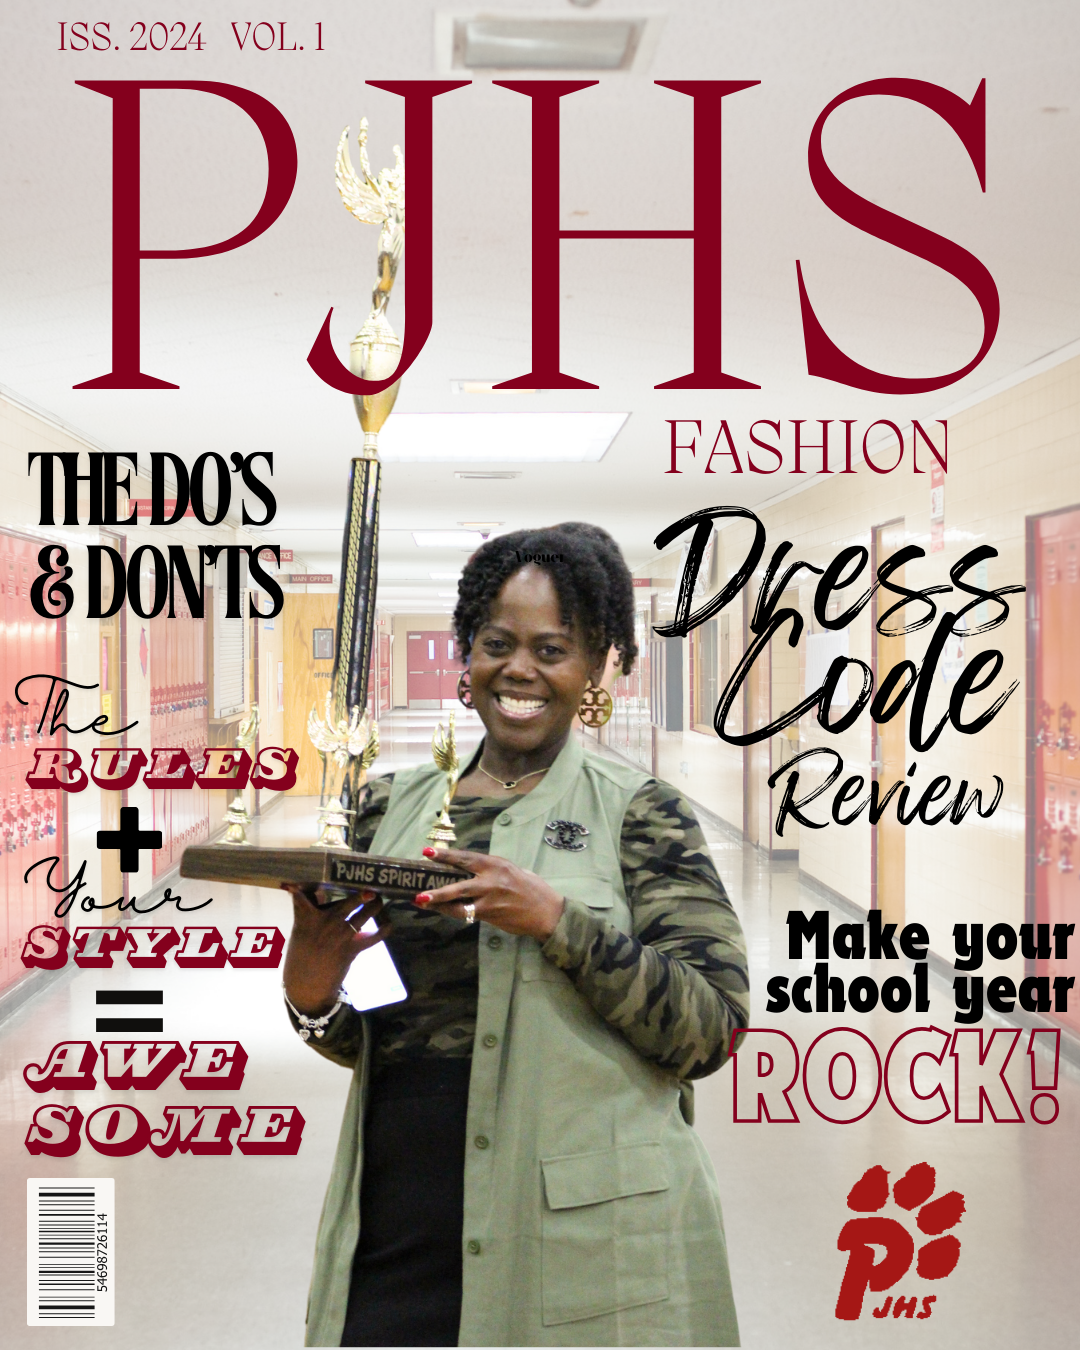 MRs. Taylor in front of a pjhs magazine cover detailing the title of "dress code reminders"